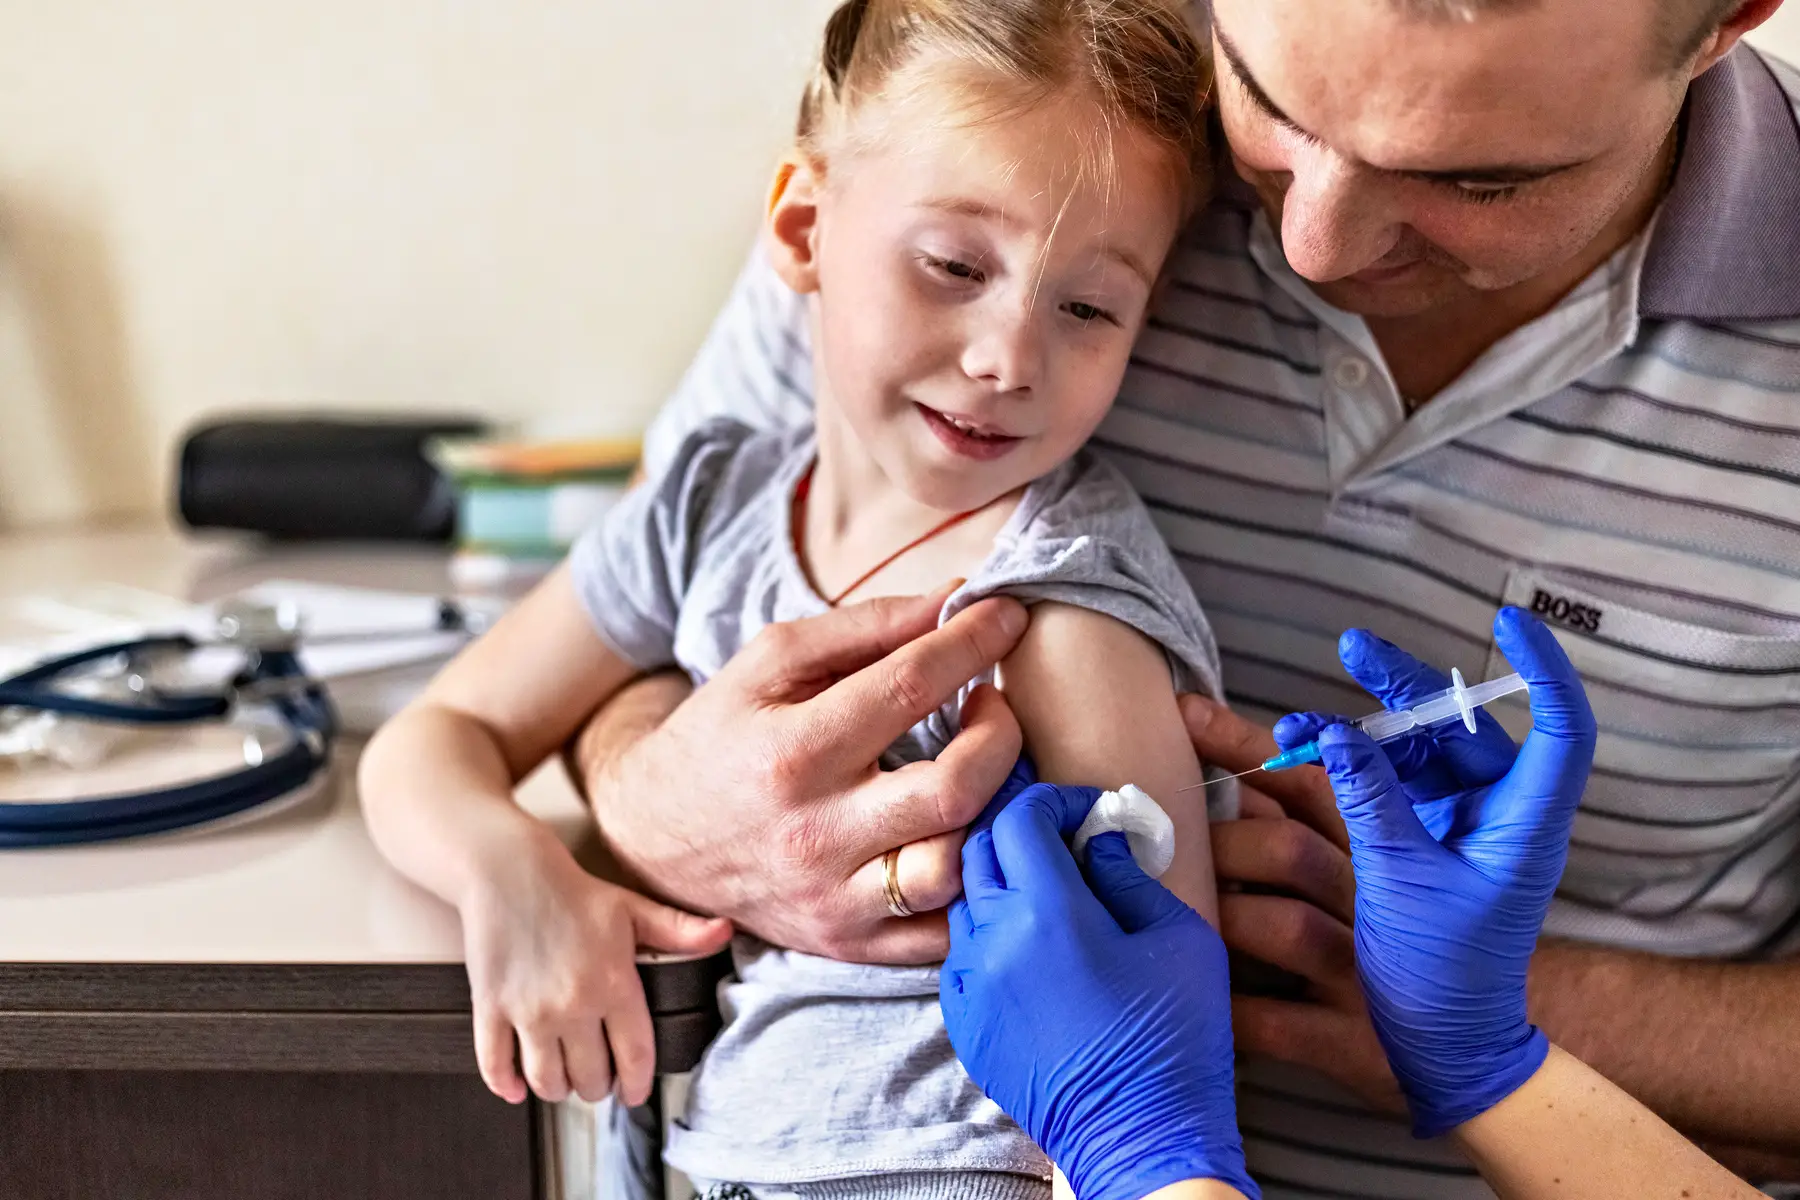 Child receiving a COVID-19 vaccine in Moscow